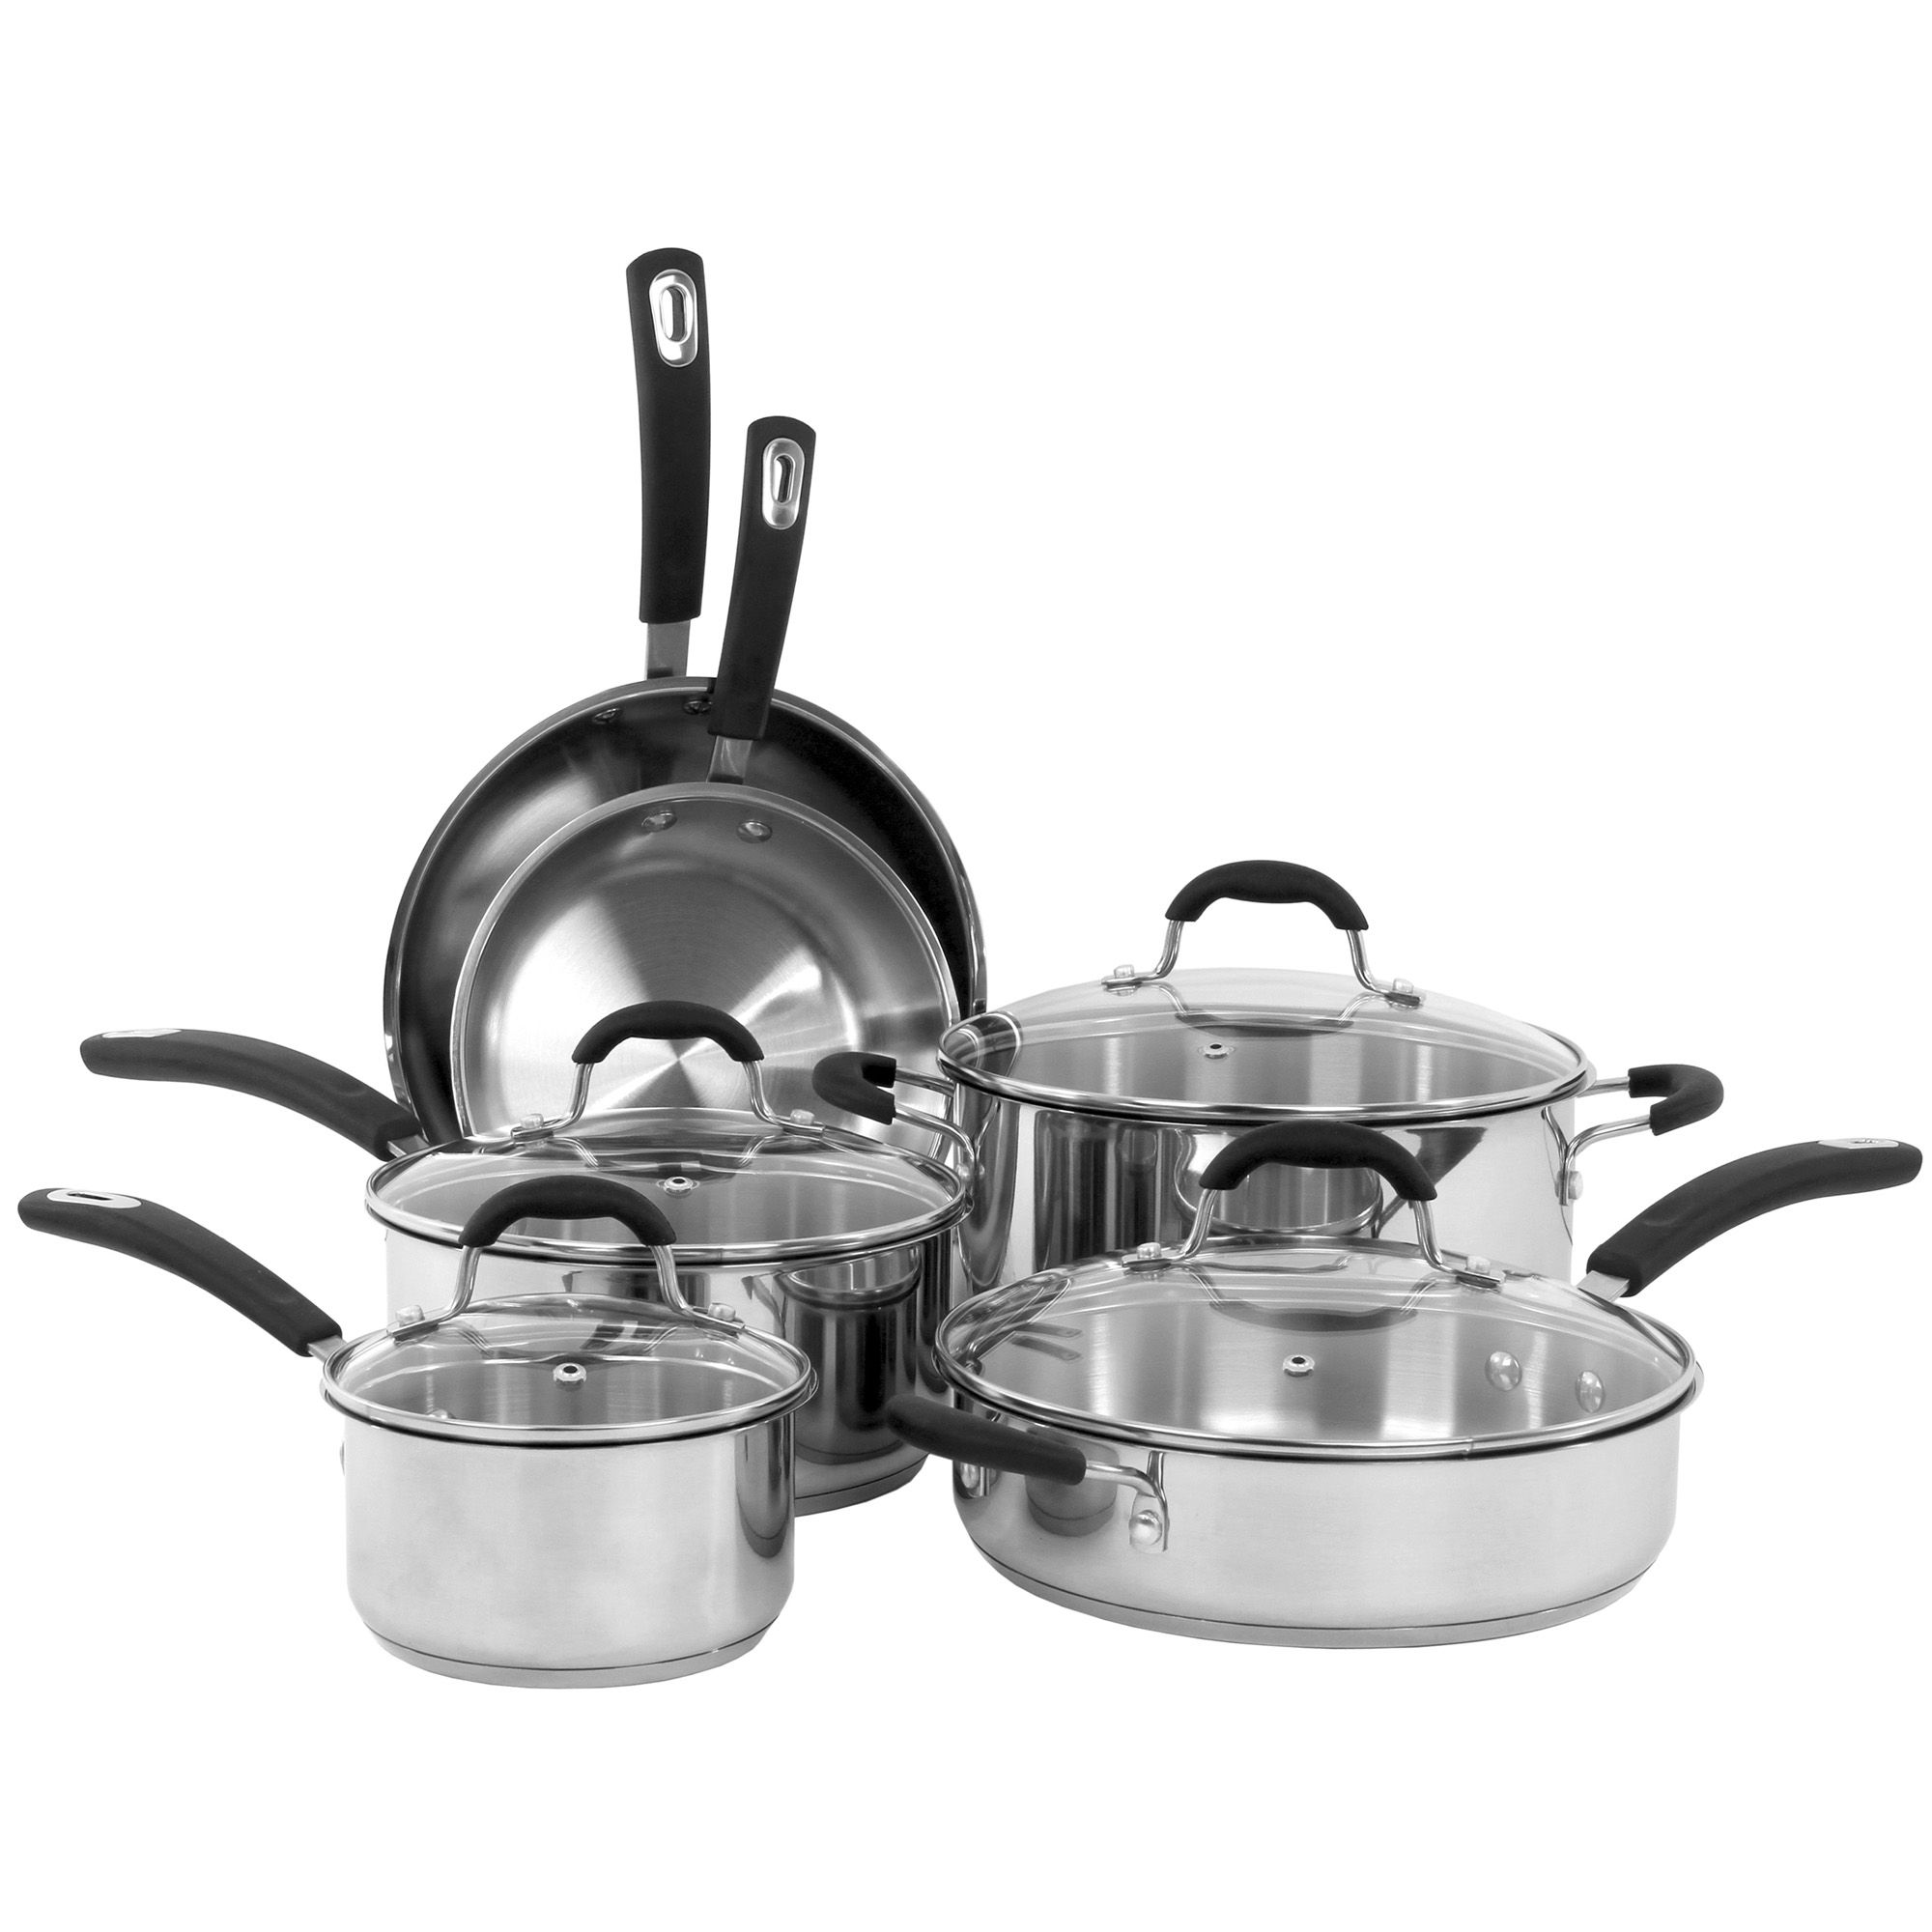 Fingerhut - All-Clad 10-Pc. Stainless Steel Cookware Set with Lasagna Pan,  Oven Mitts & Cookbook